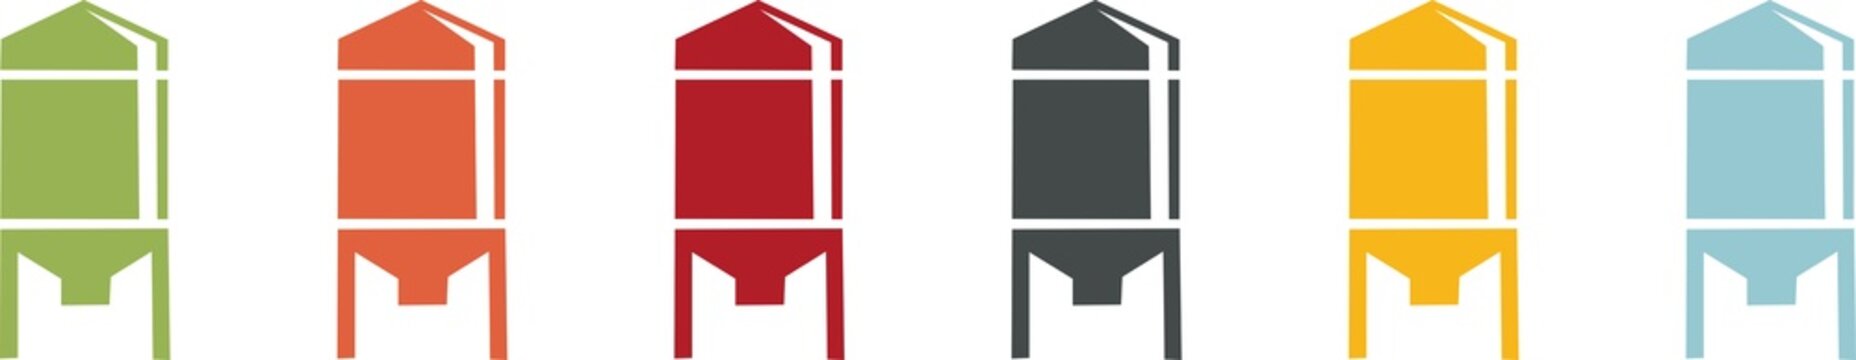 Coloured grain silo icons for agriculture in PNG format